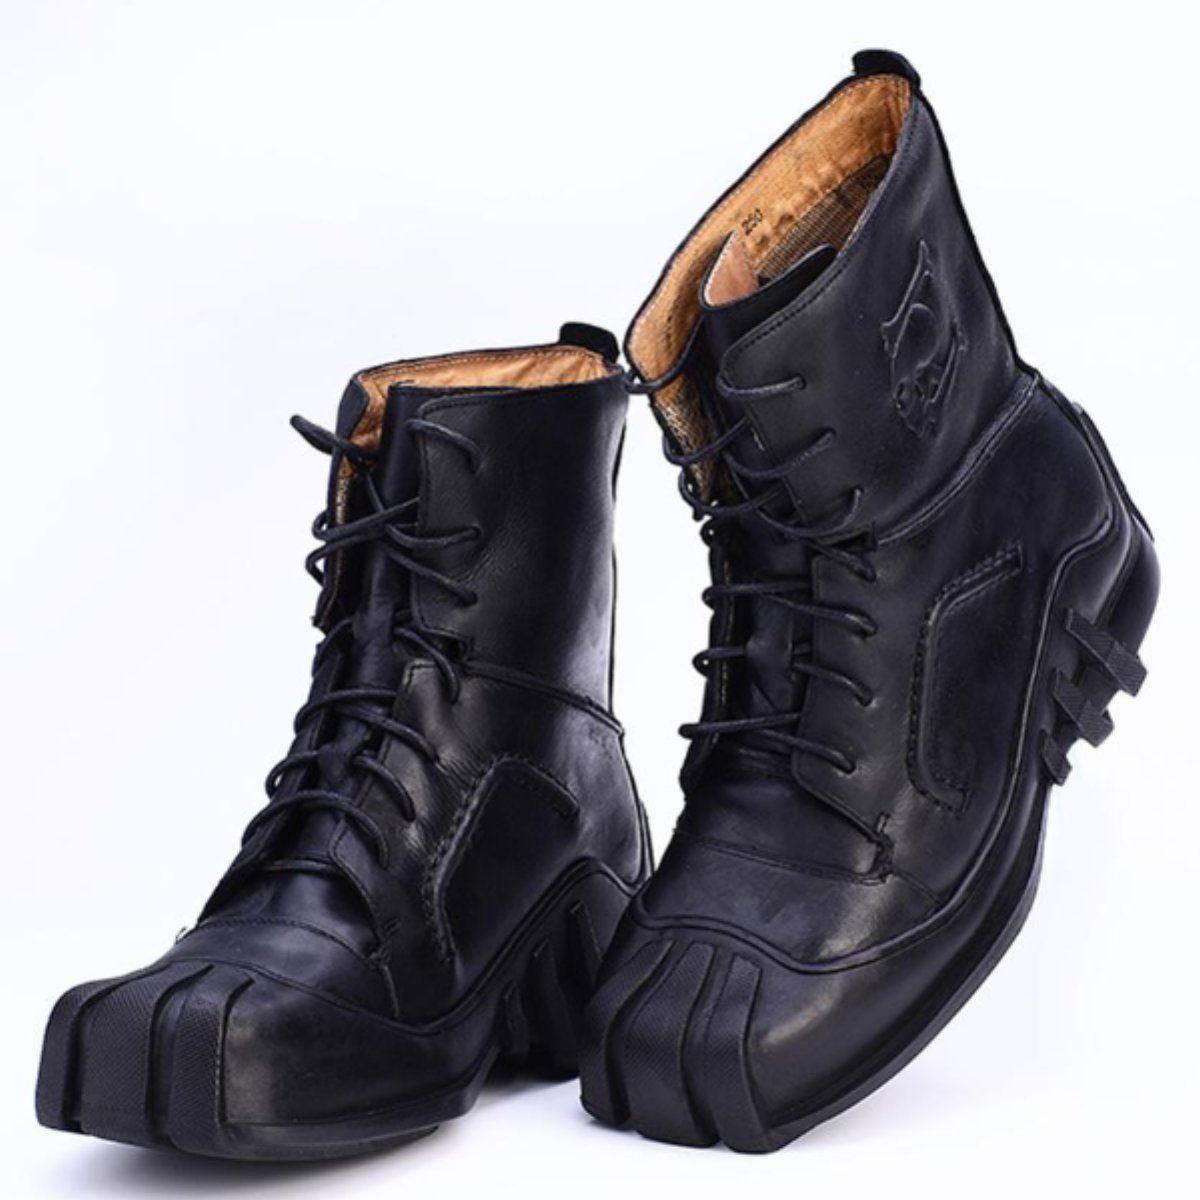 High Quality Leather Skull Boots - American Legend Rider